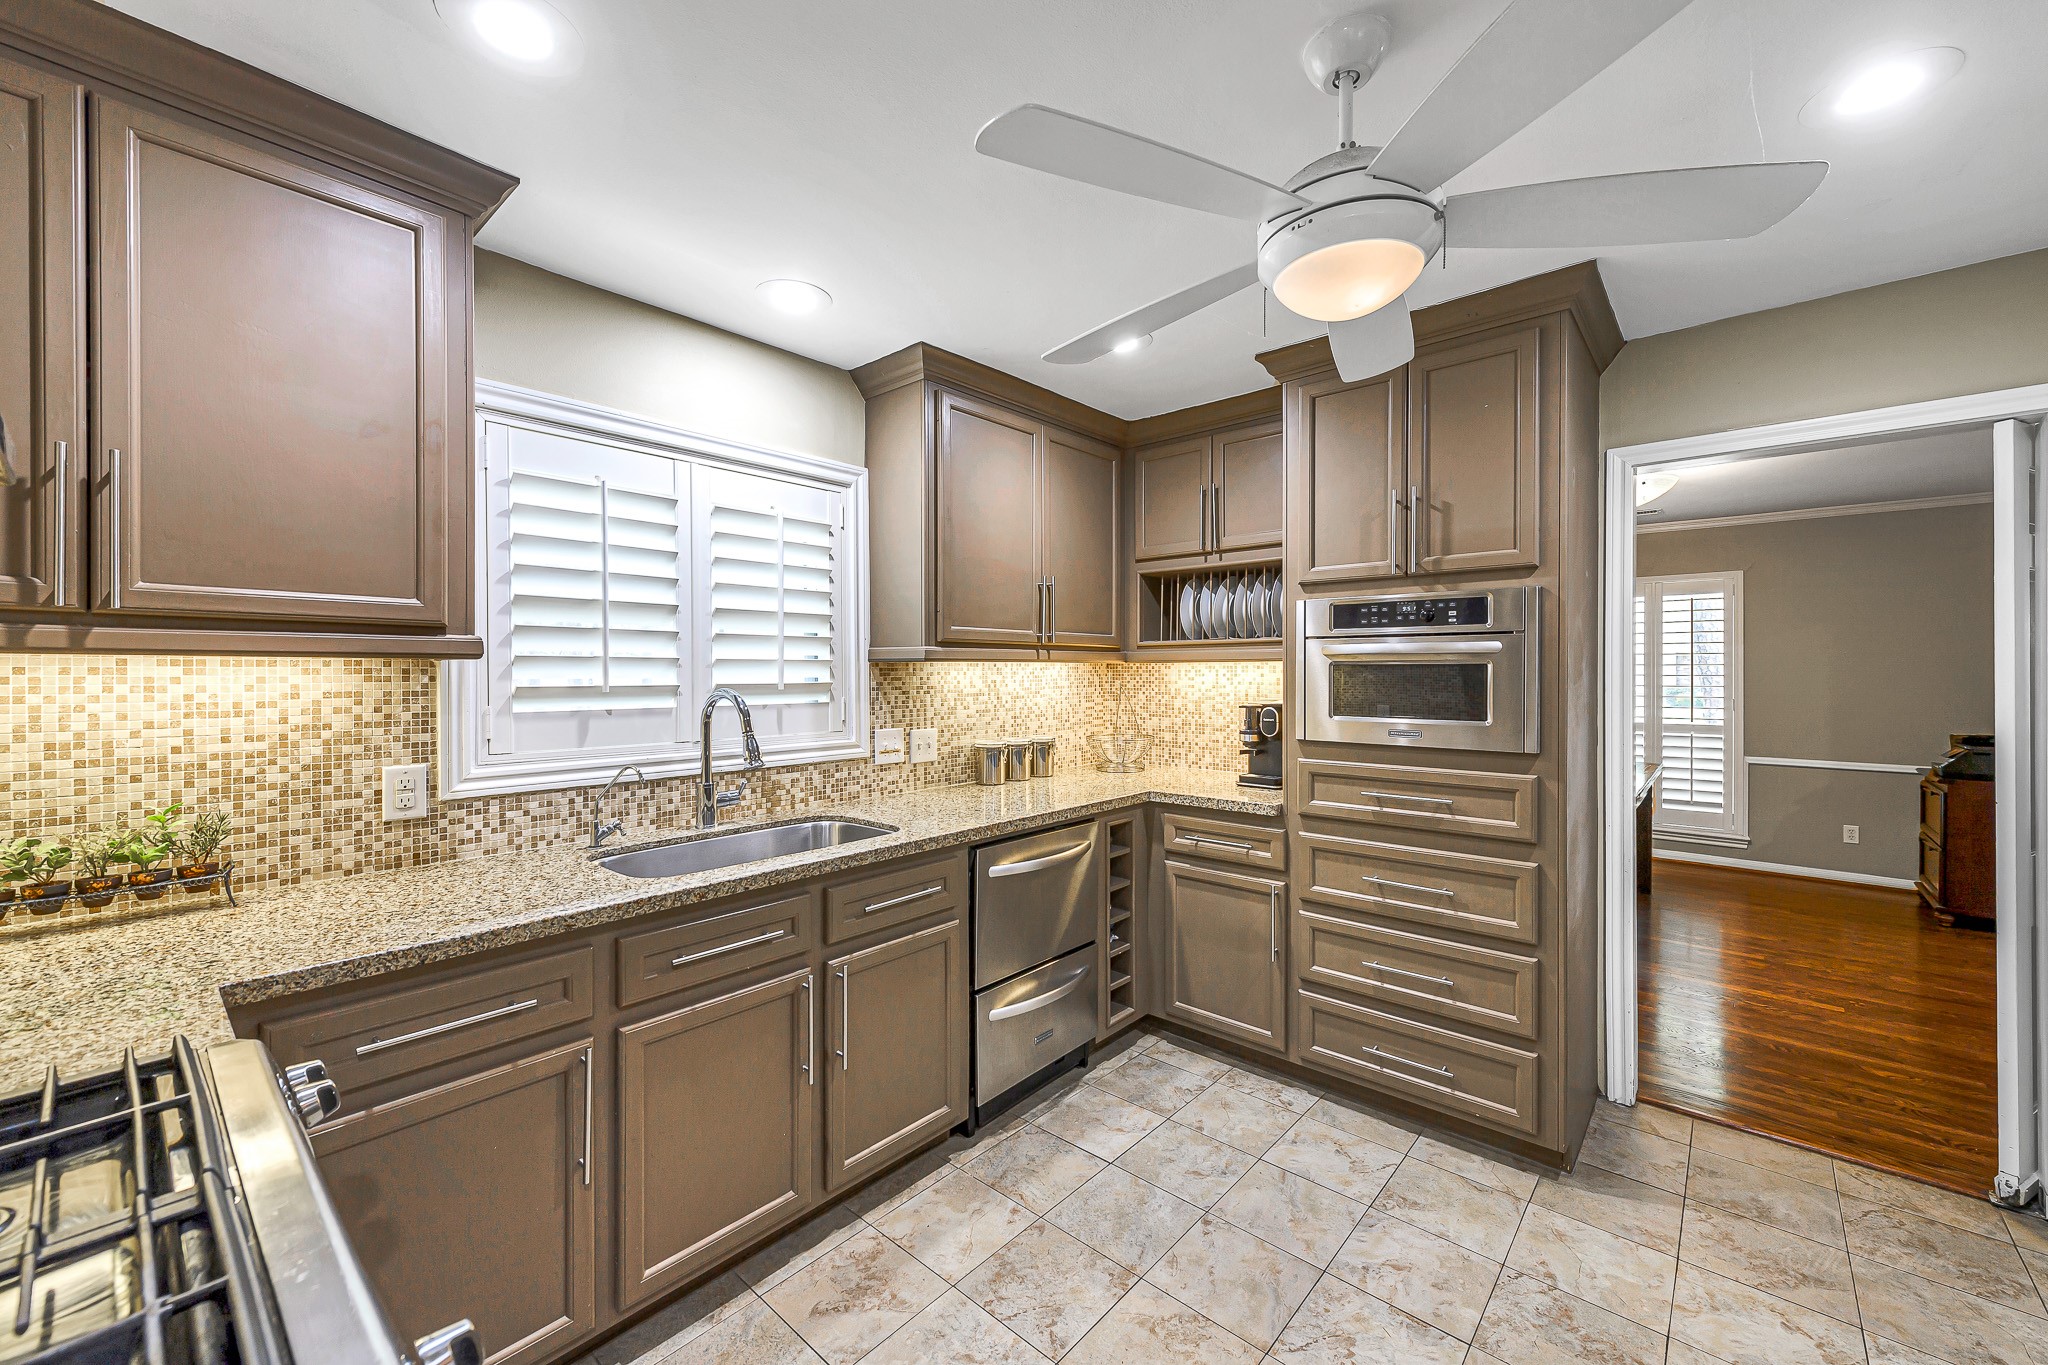 This updated kitchen is a harmonious blend of classic elegance and modern convenience.